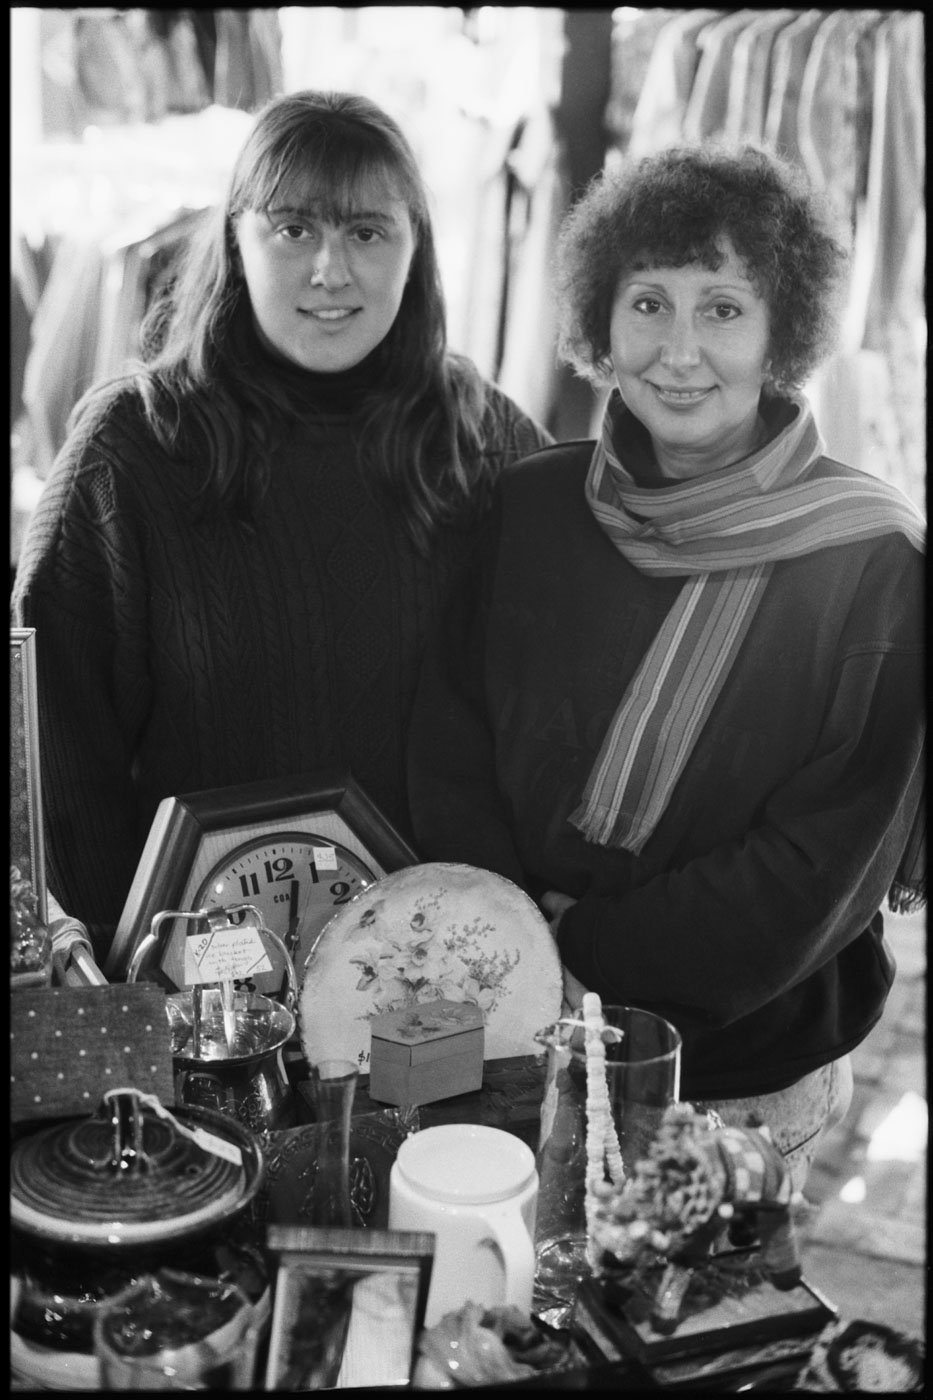 Maria Goodstone, right, and her daughter Alexis, left (bric-a-brac) | 1992 | R17-31